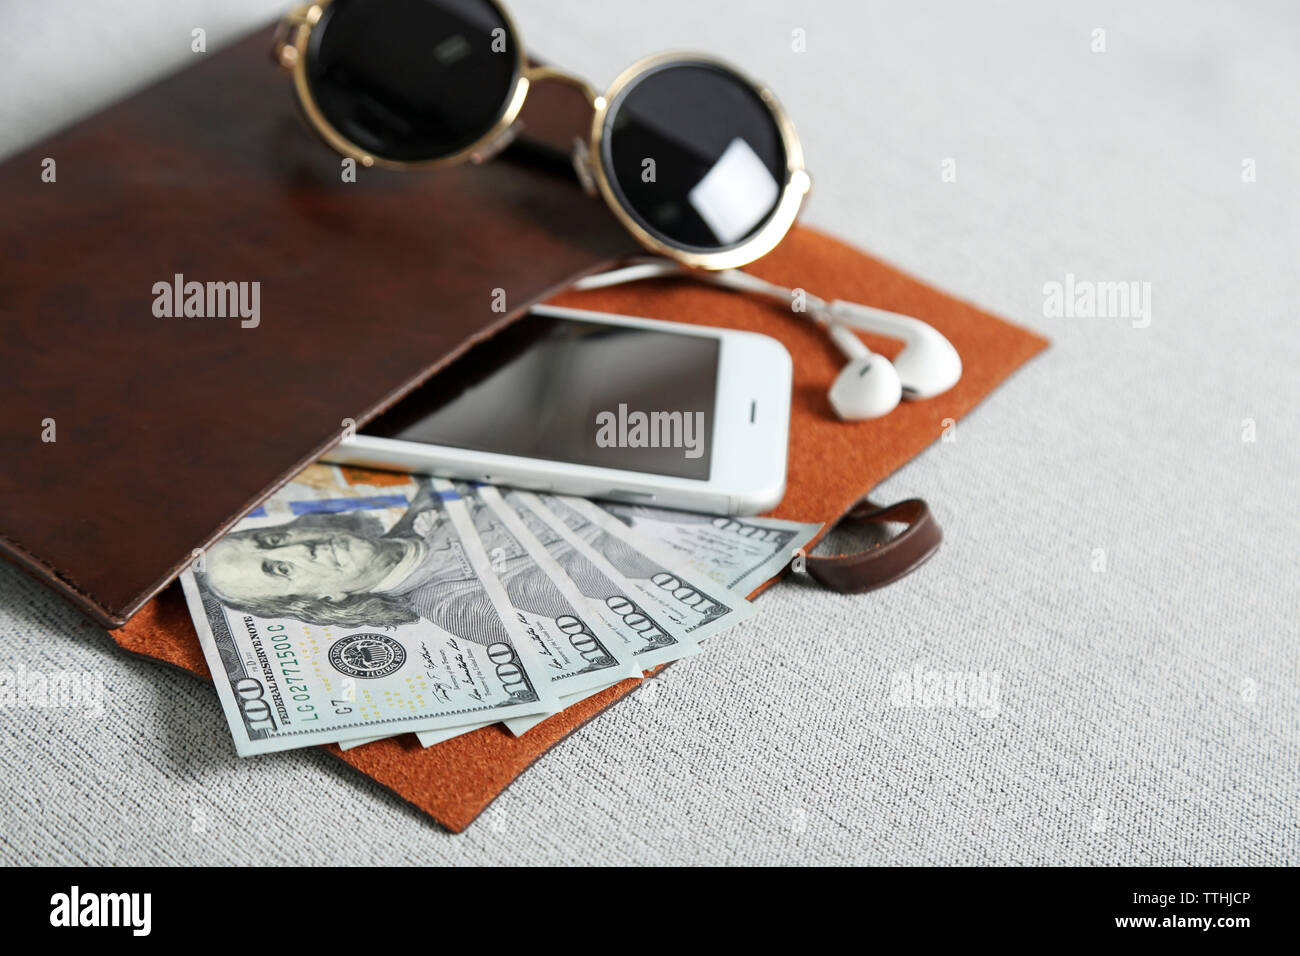 Leather purse with mobile phone, glasses and dollar banknotes on grey cloth background Stock Photo